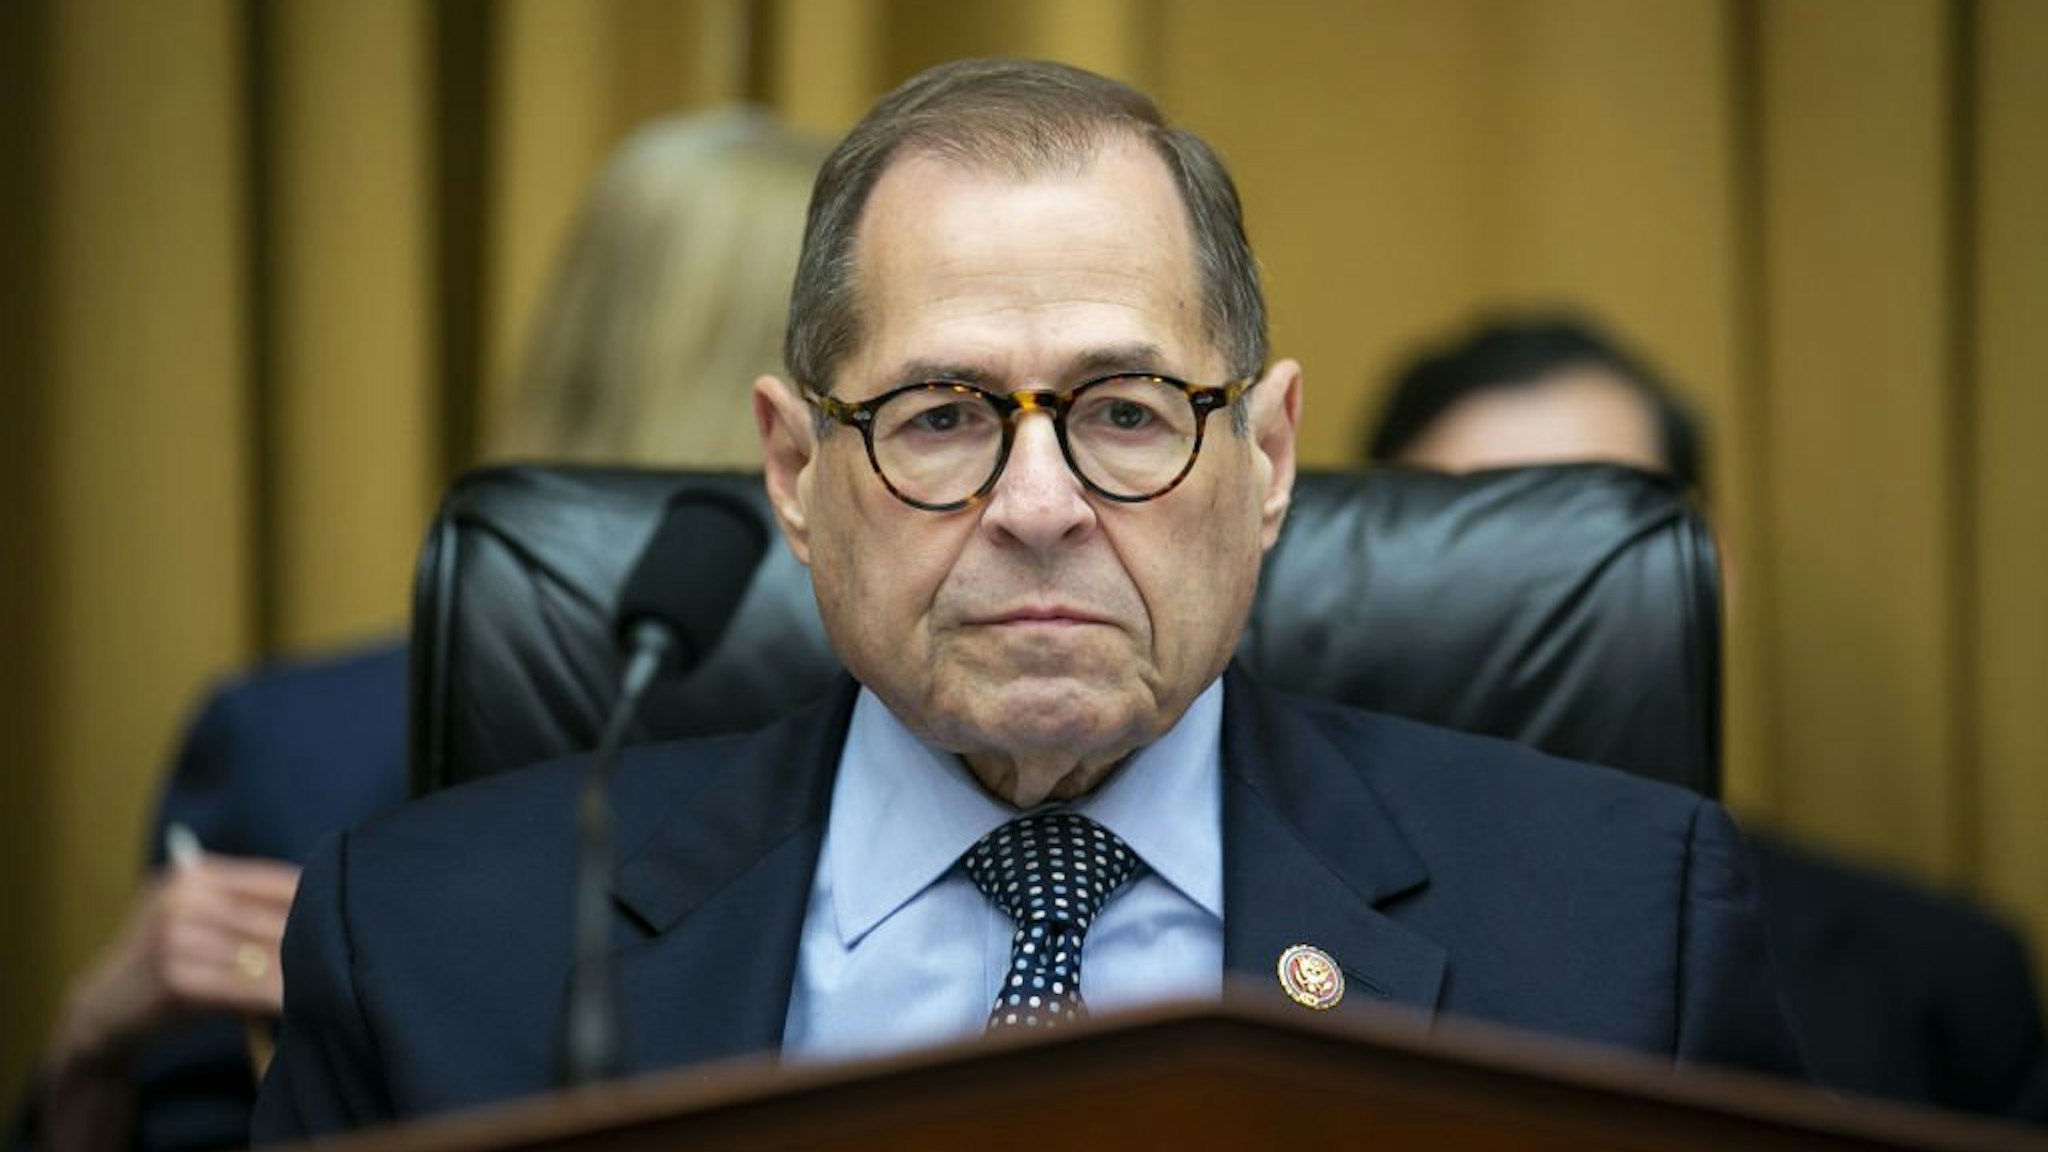 Jerry Nadler, chairman of the House Judiciary Committee, sits during a hearing in Washington